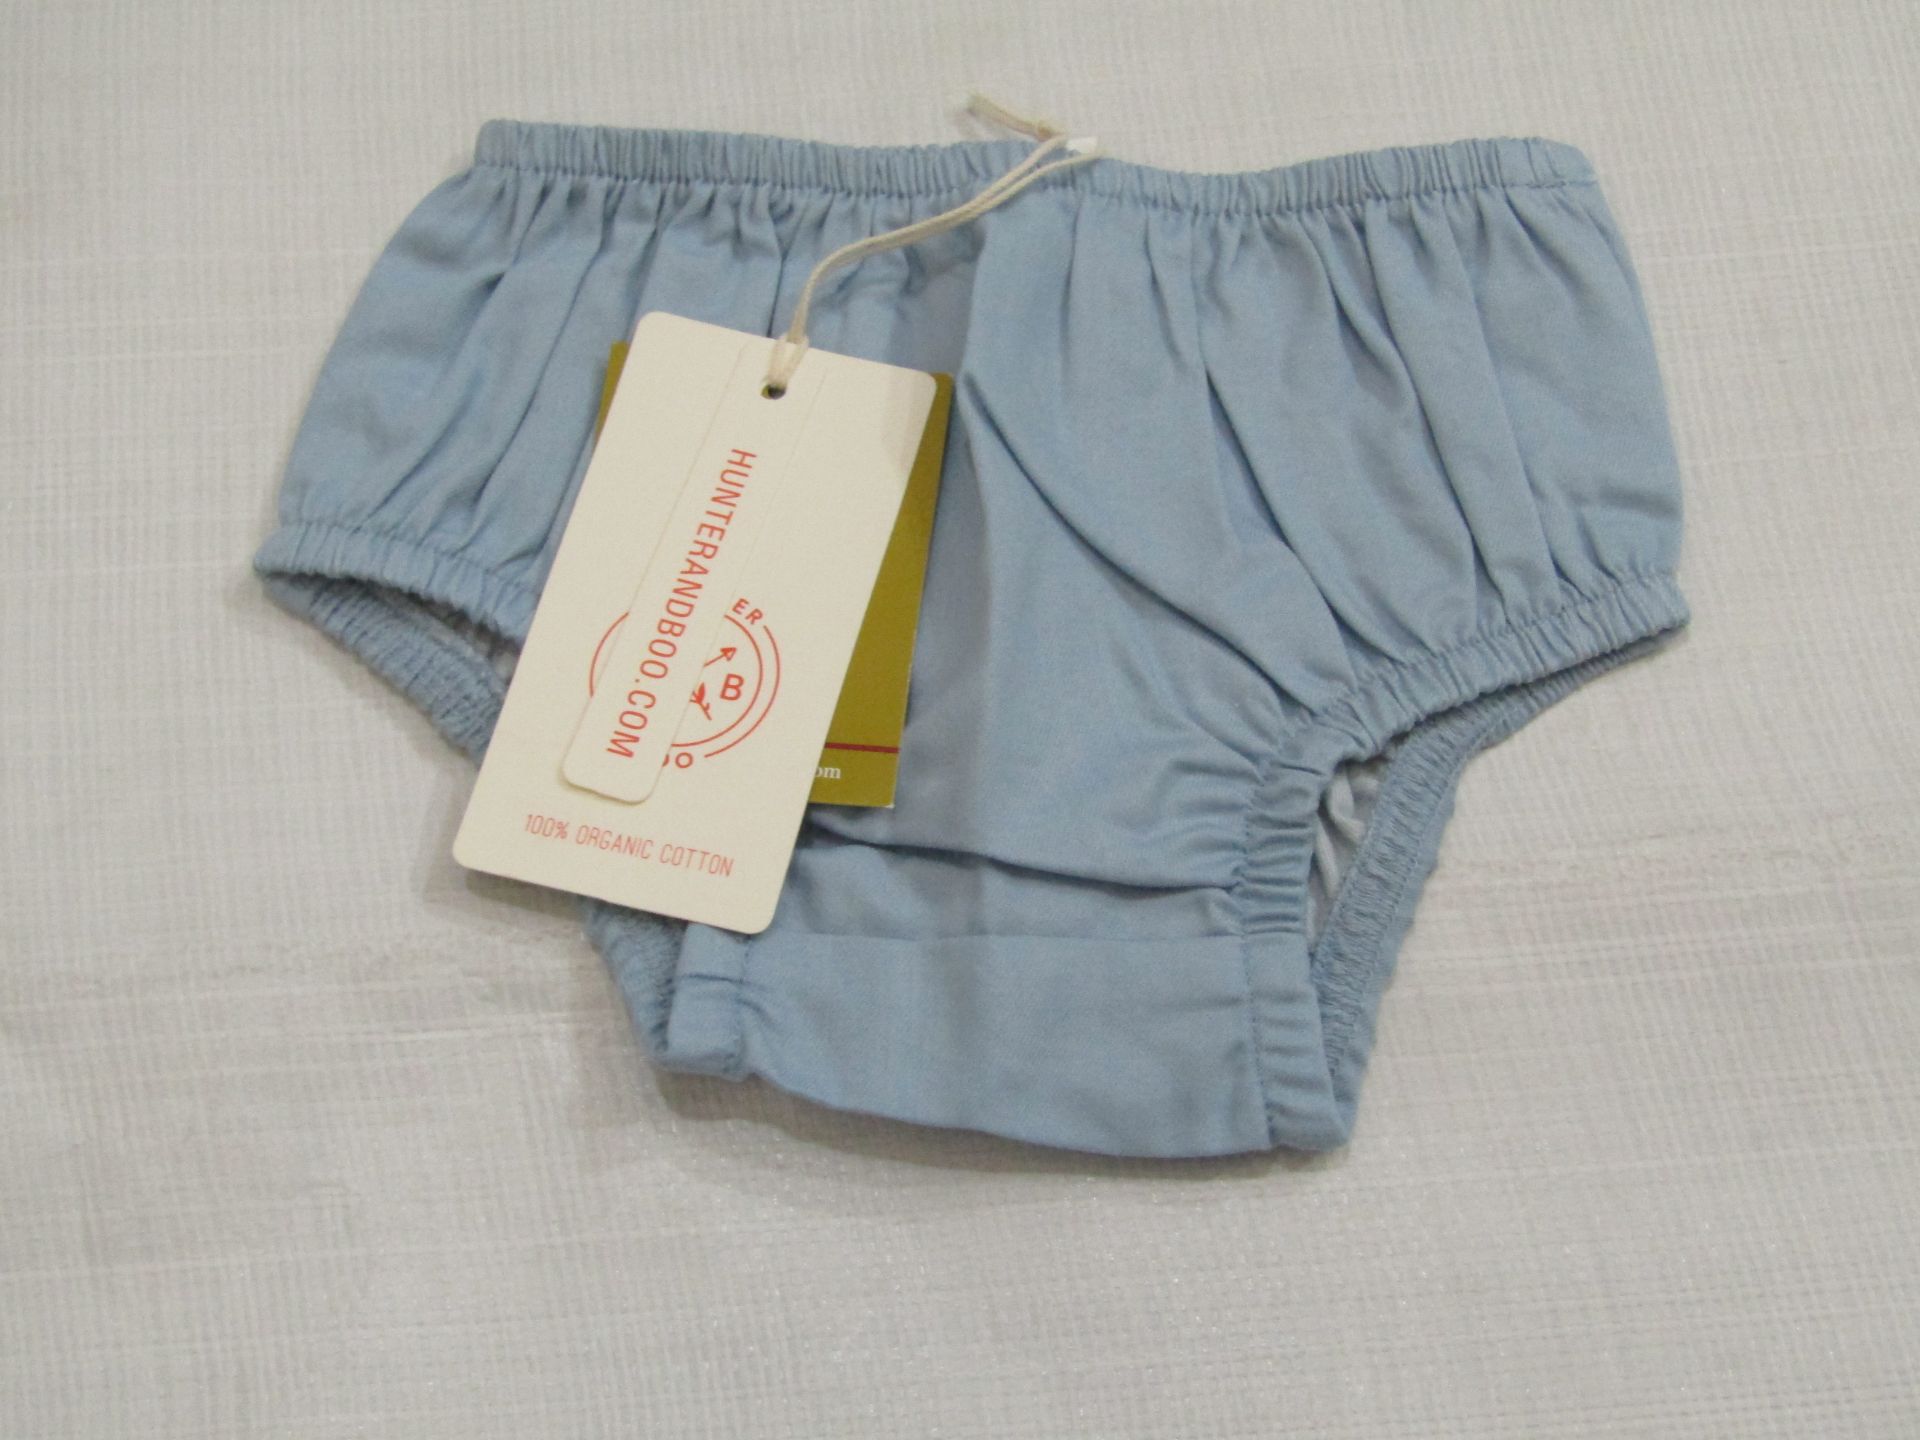 5 X Pairs of Chambray Bloomers Aged 3-6 Months New & Packaged RRP £8